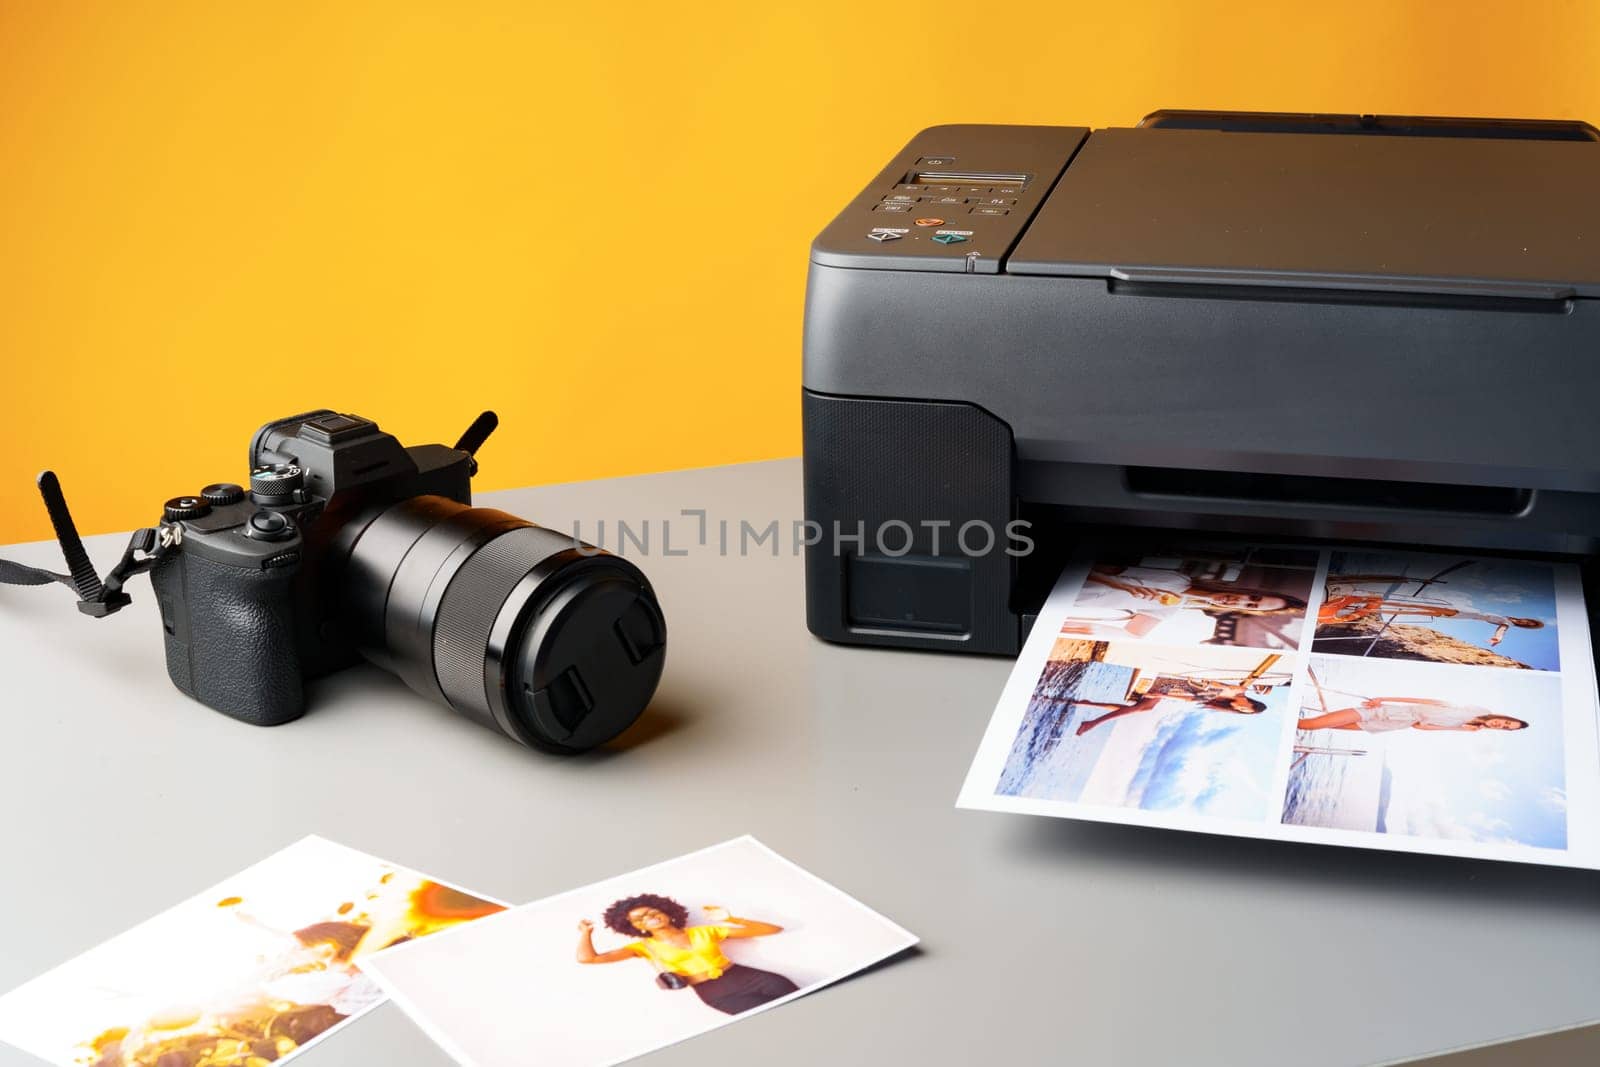 Printer printing colorful photos of people close up, yellow background by Fabrikasimf